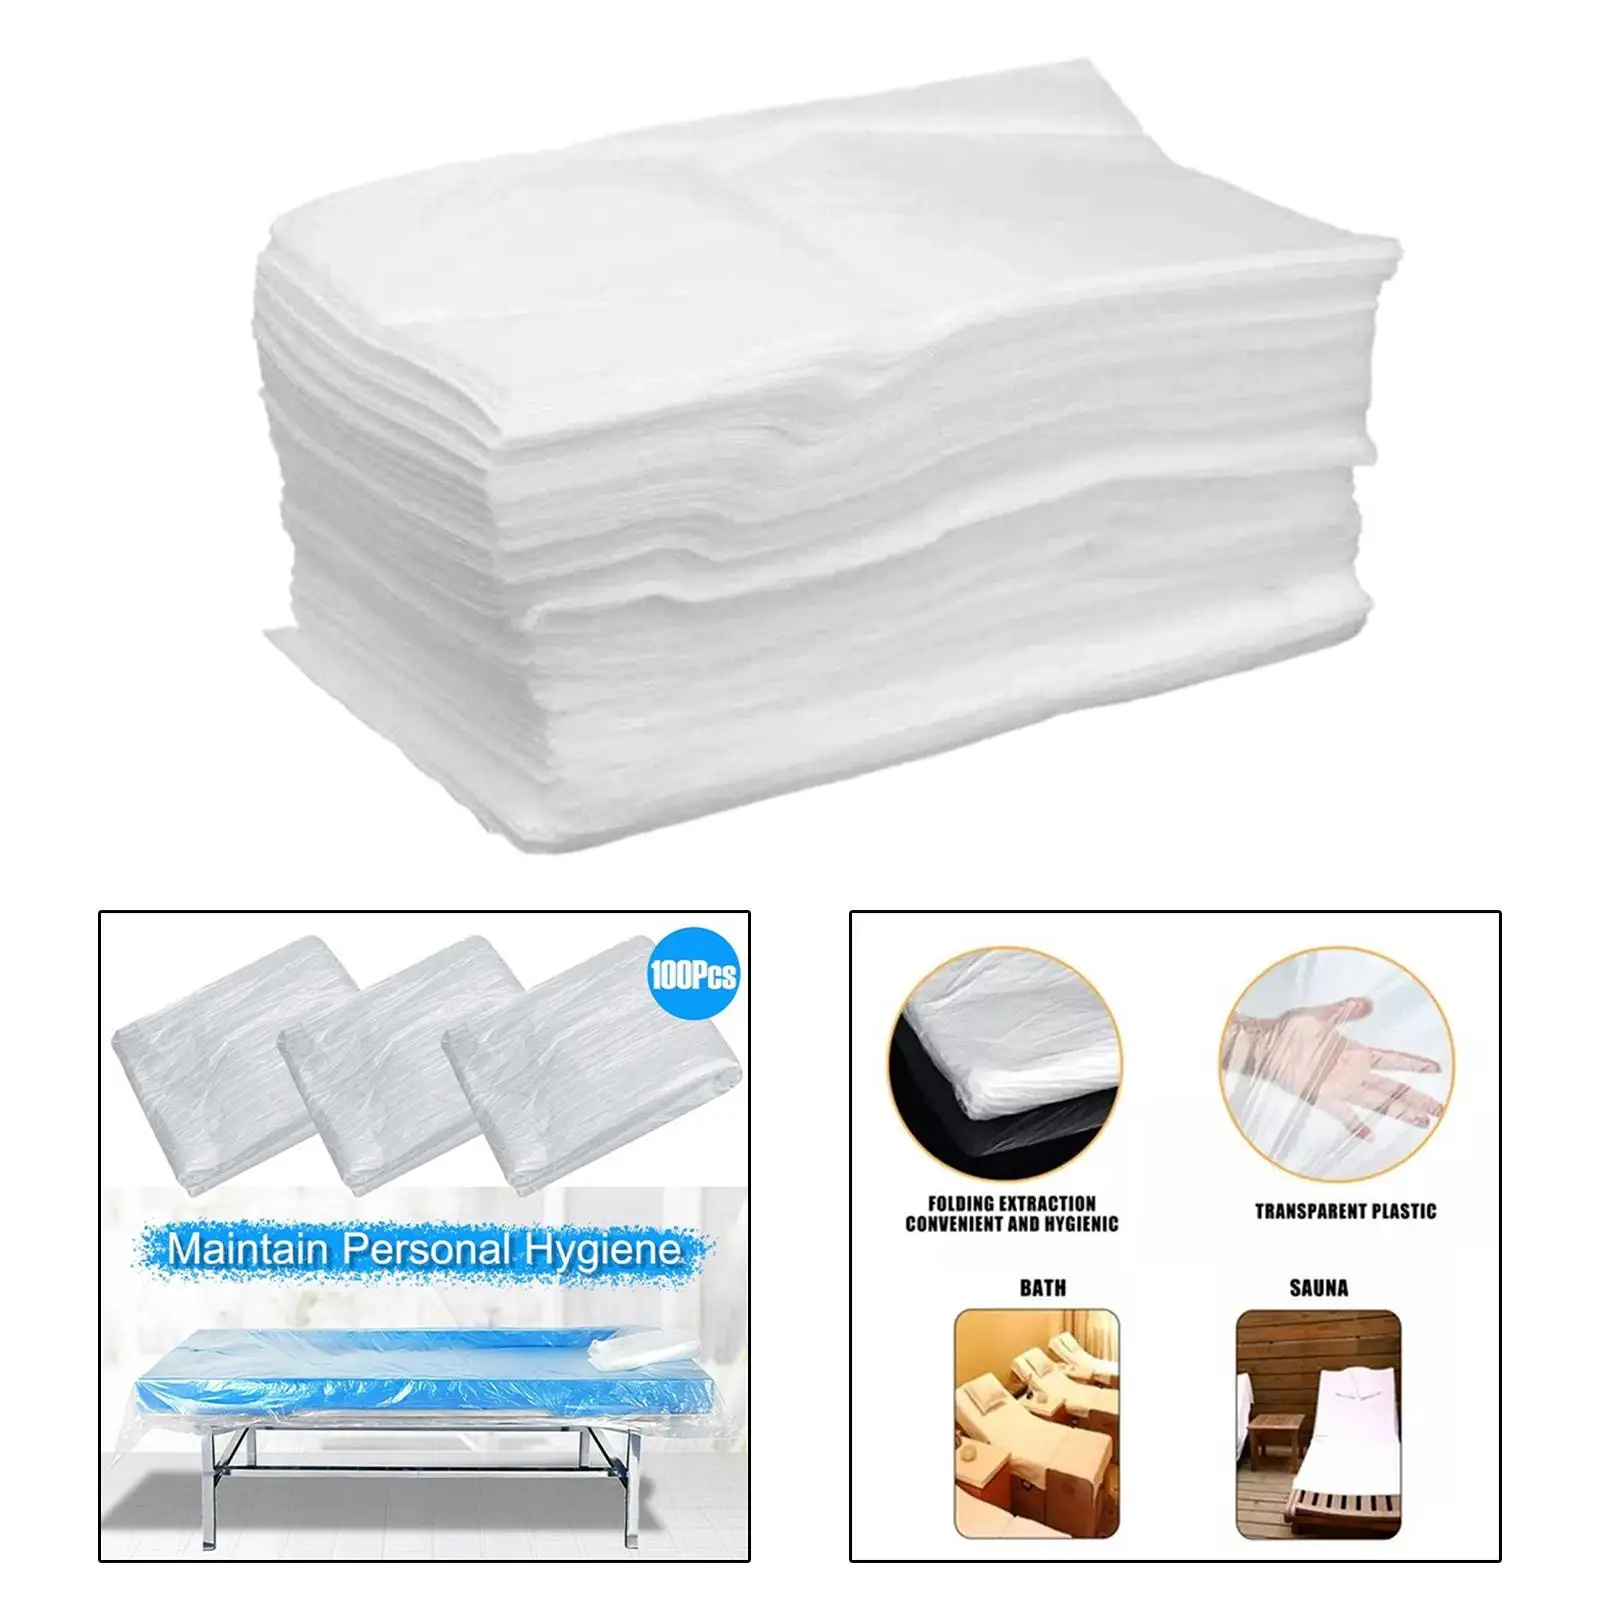 100 Pieces Disposable Massage Table Sheets protector SPA Bed Covers for Esthetician Beauty Bed Waxing Salon Table Lash Bed